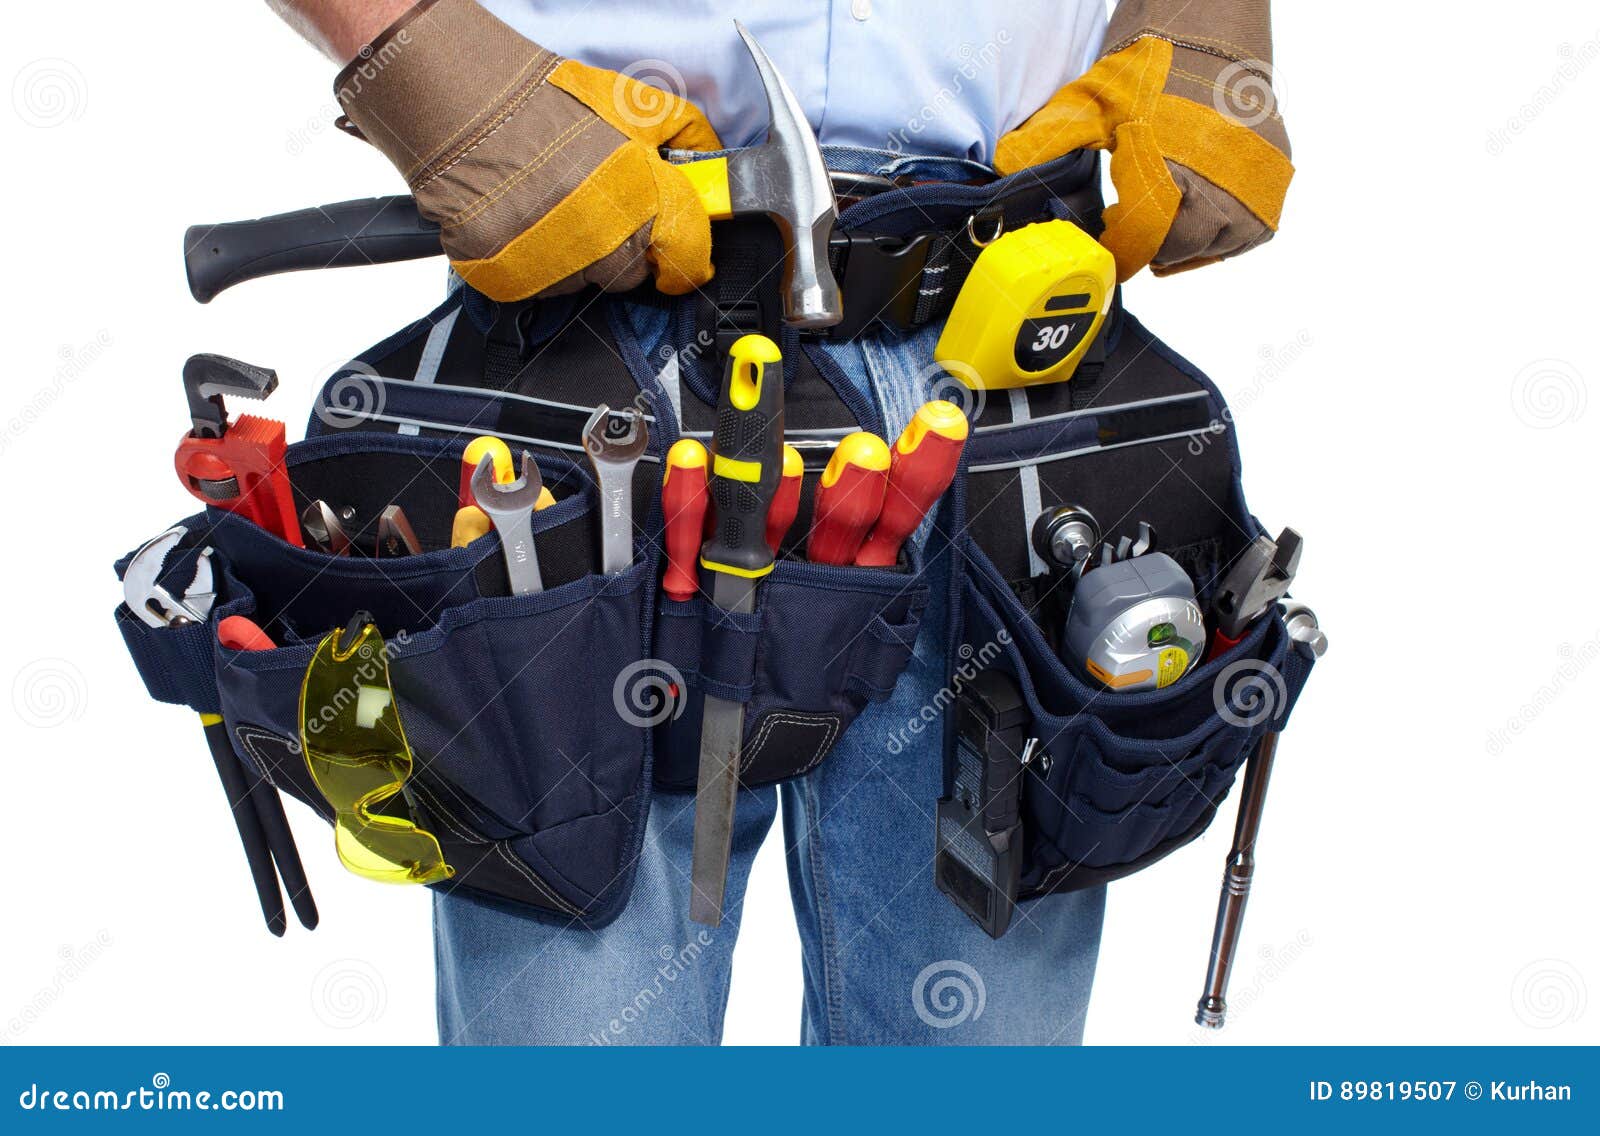 worker with a tool belt.